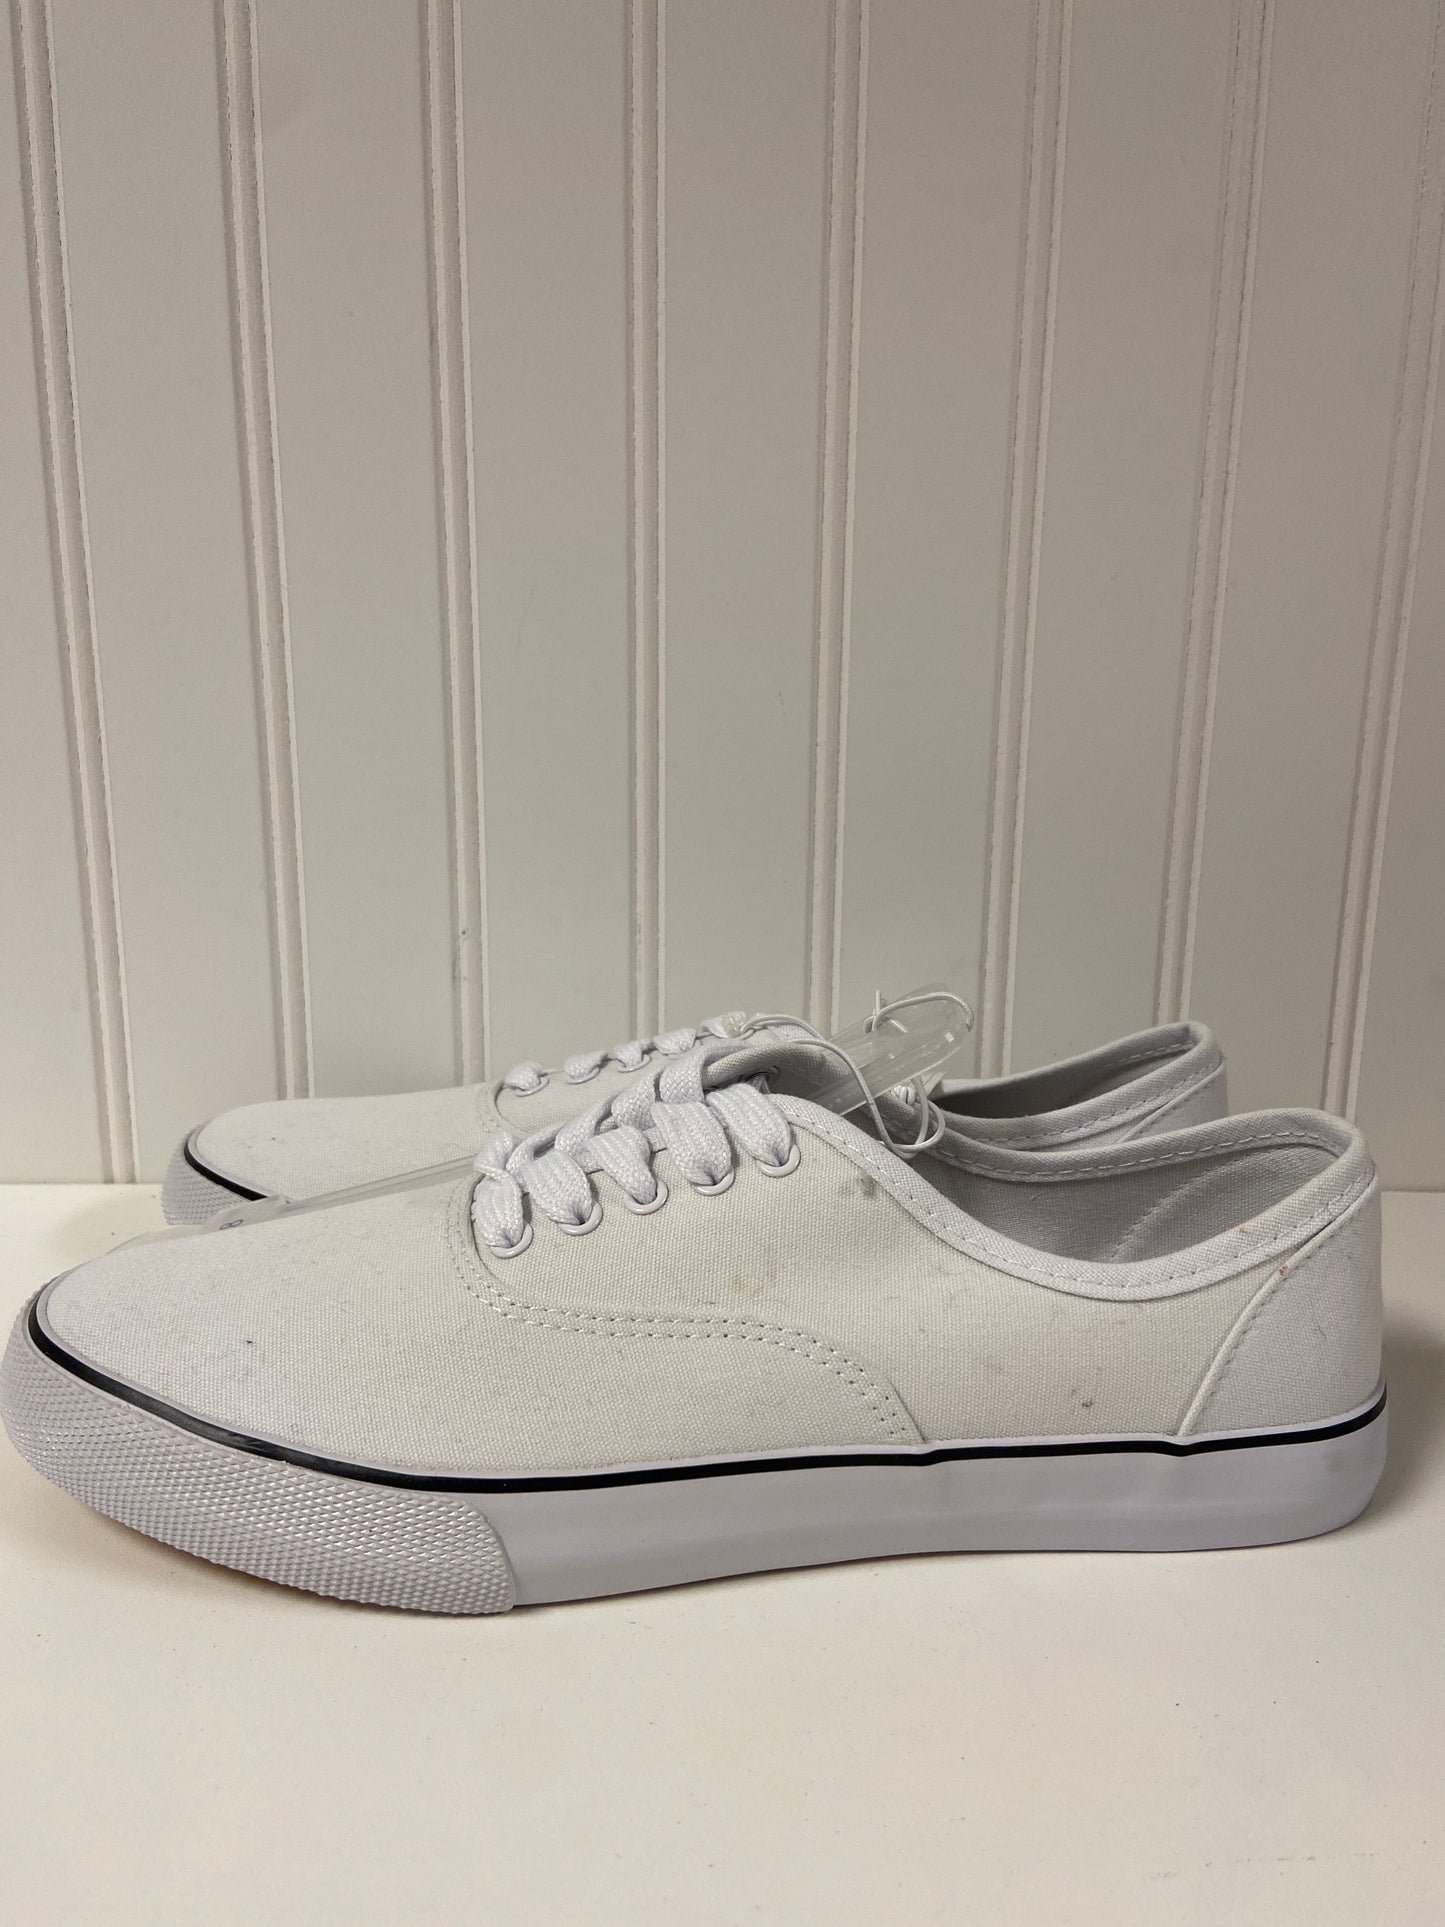 White Shoes Sneakers A New Day, Size 8